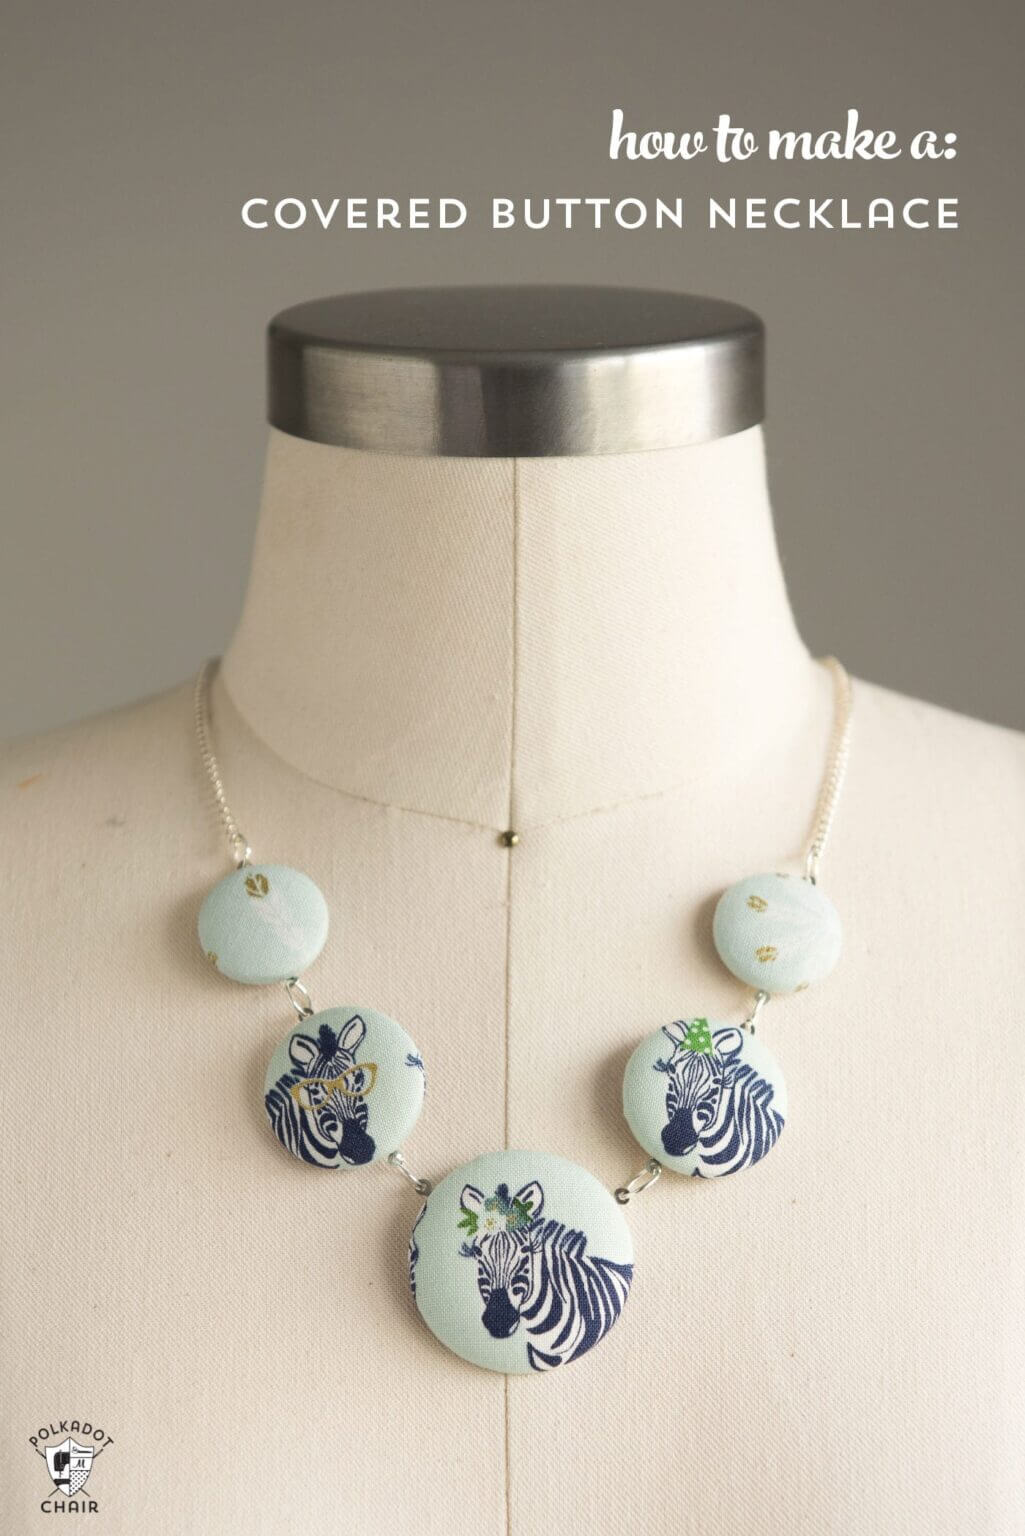 In  Five Fun Button Crafts, this blogger covered buttons with fabric and make a necklace.